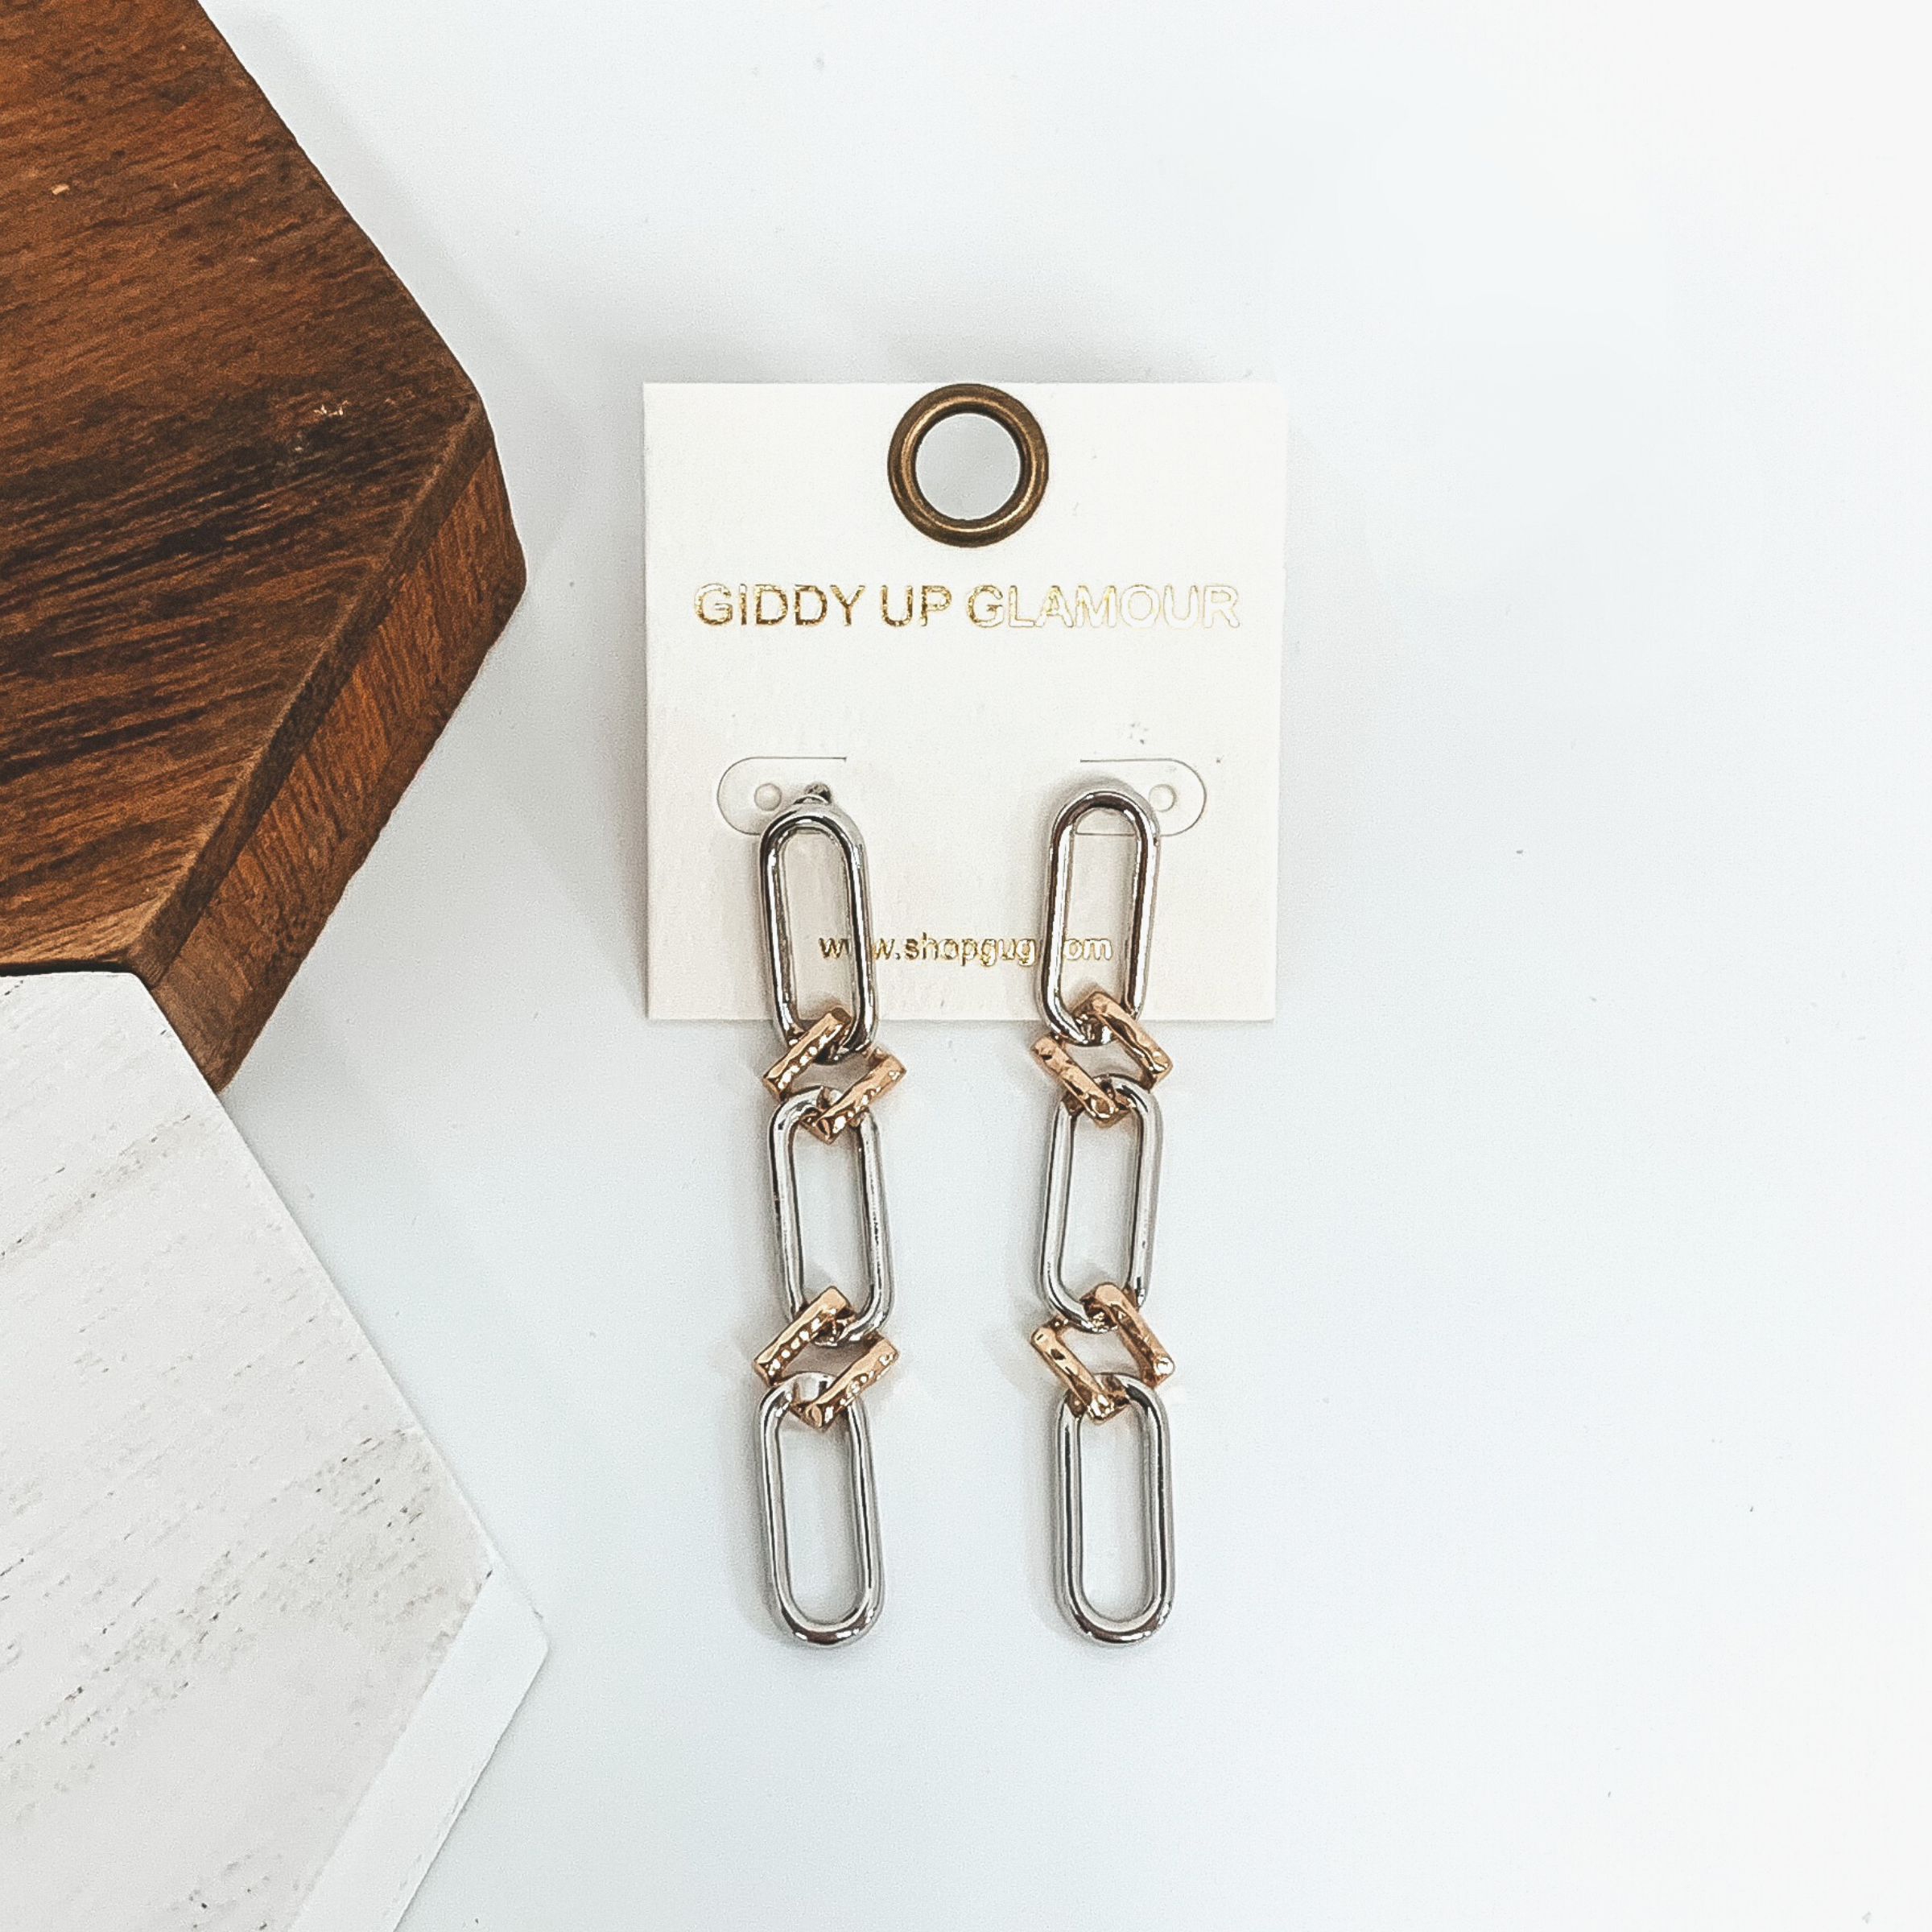 Don't Leave Me Hanging Chain Link Earrings in Silver Tone & Gold Mix Metal - Giddy Up Glamour Boutique